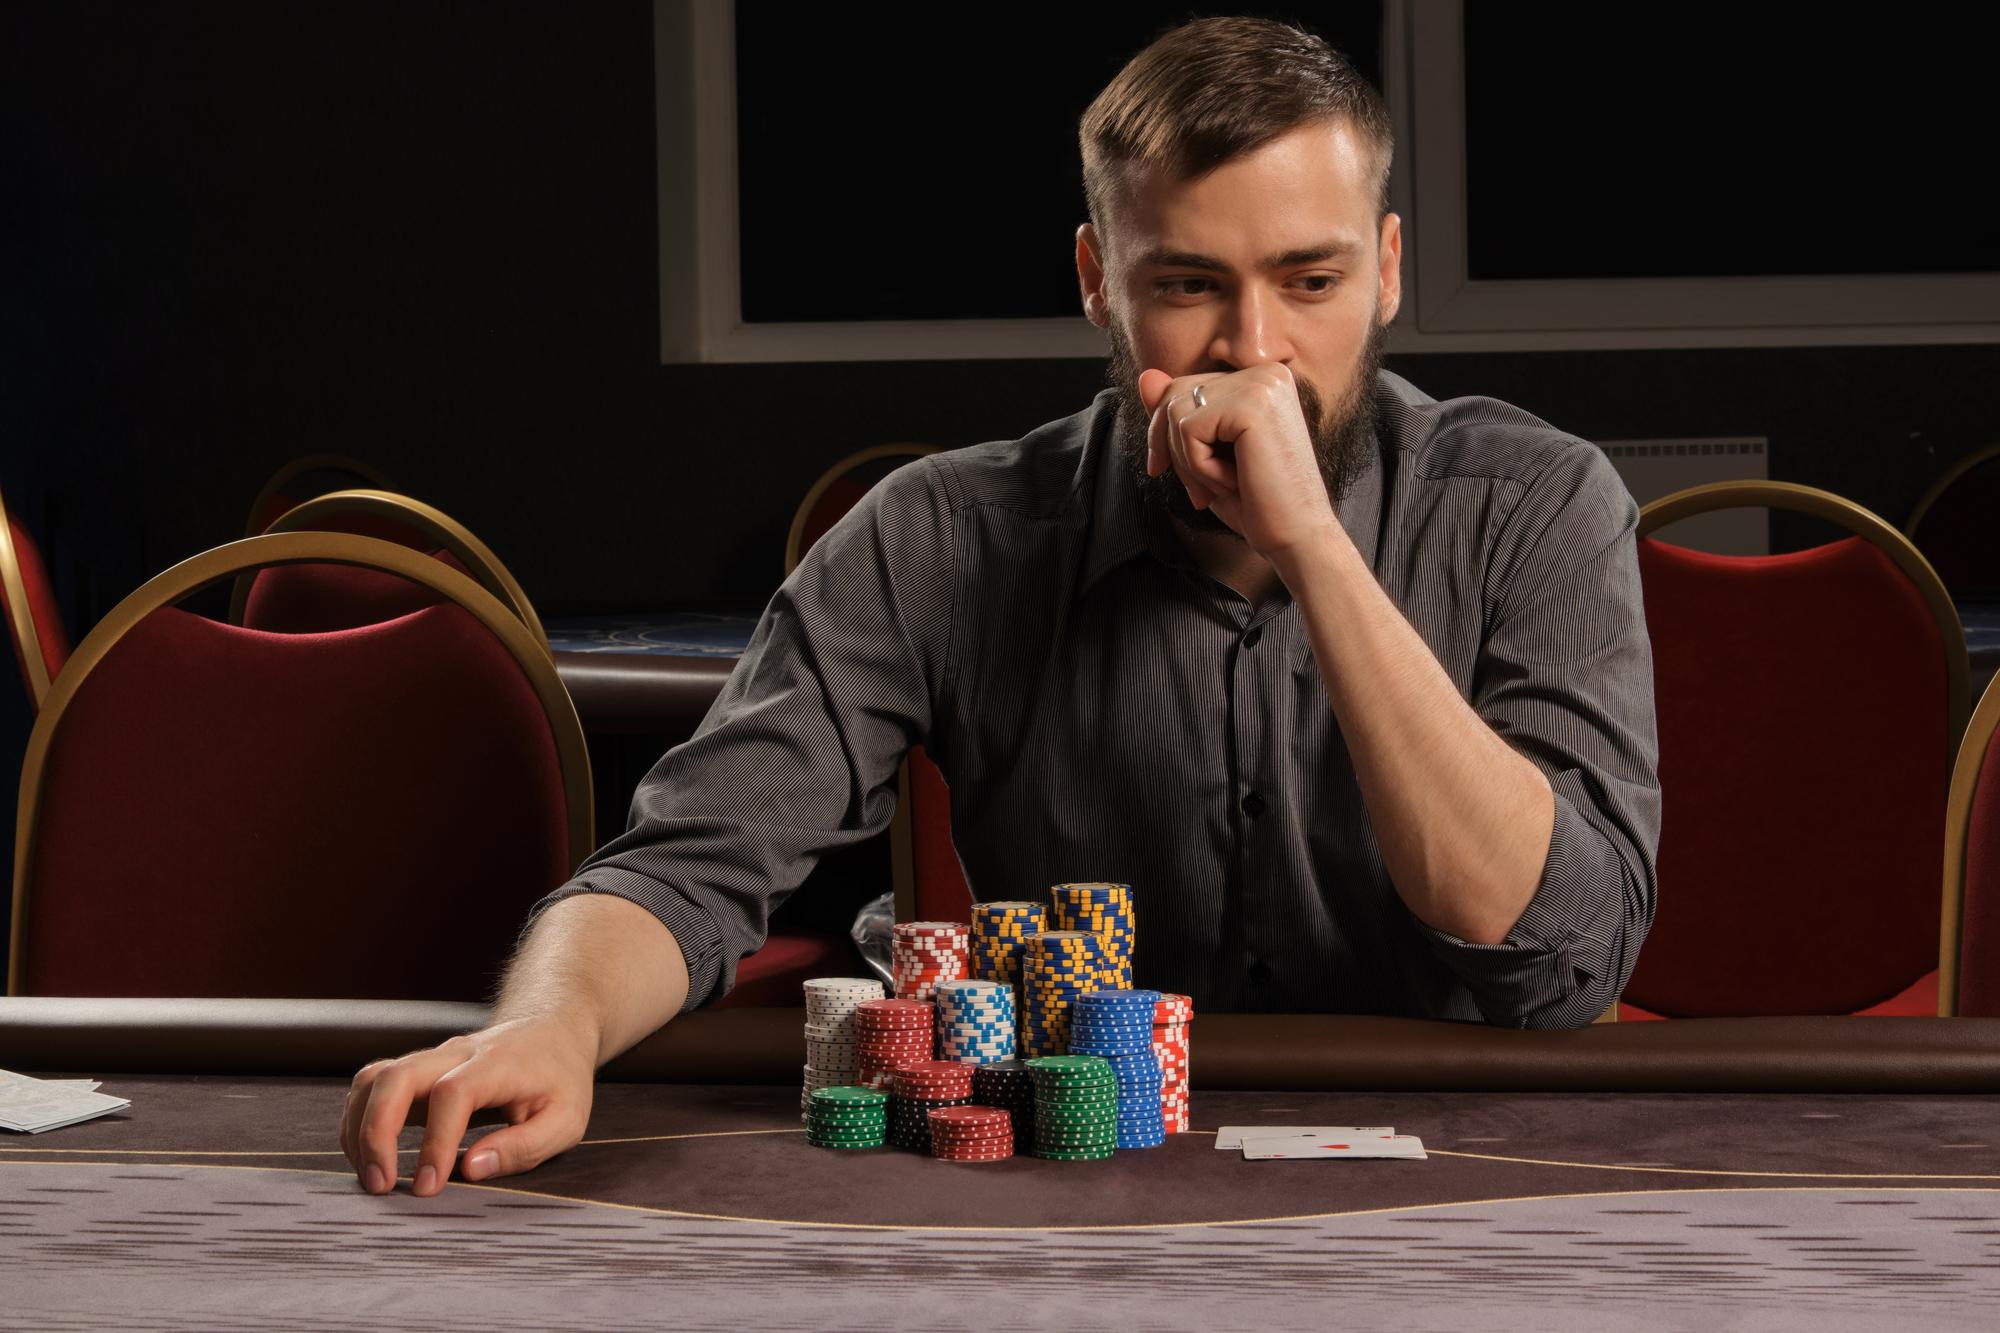 handsome-bearded-male-in-a-gray-shirt-is-playing-poker-sitting-at-the-table-in-casino-he-is-making-bets-waiting-for-a-big-win-gambling-for-money-games-of-fortune